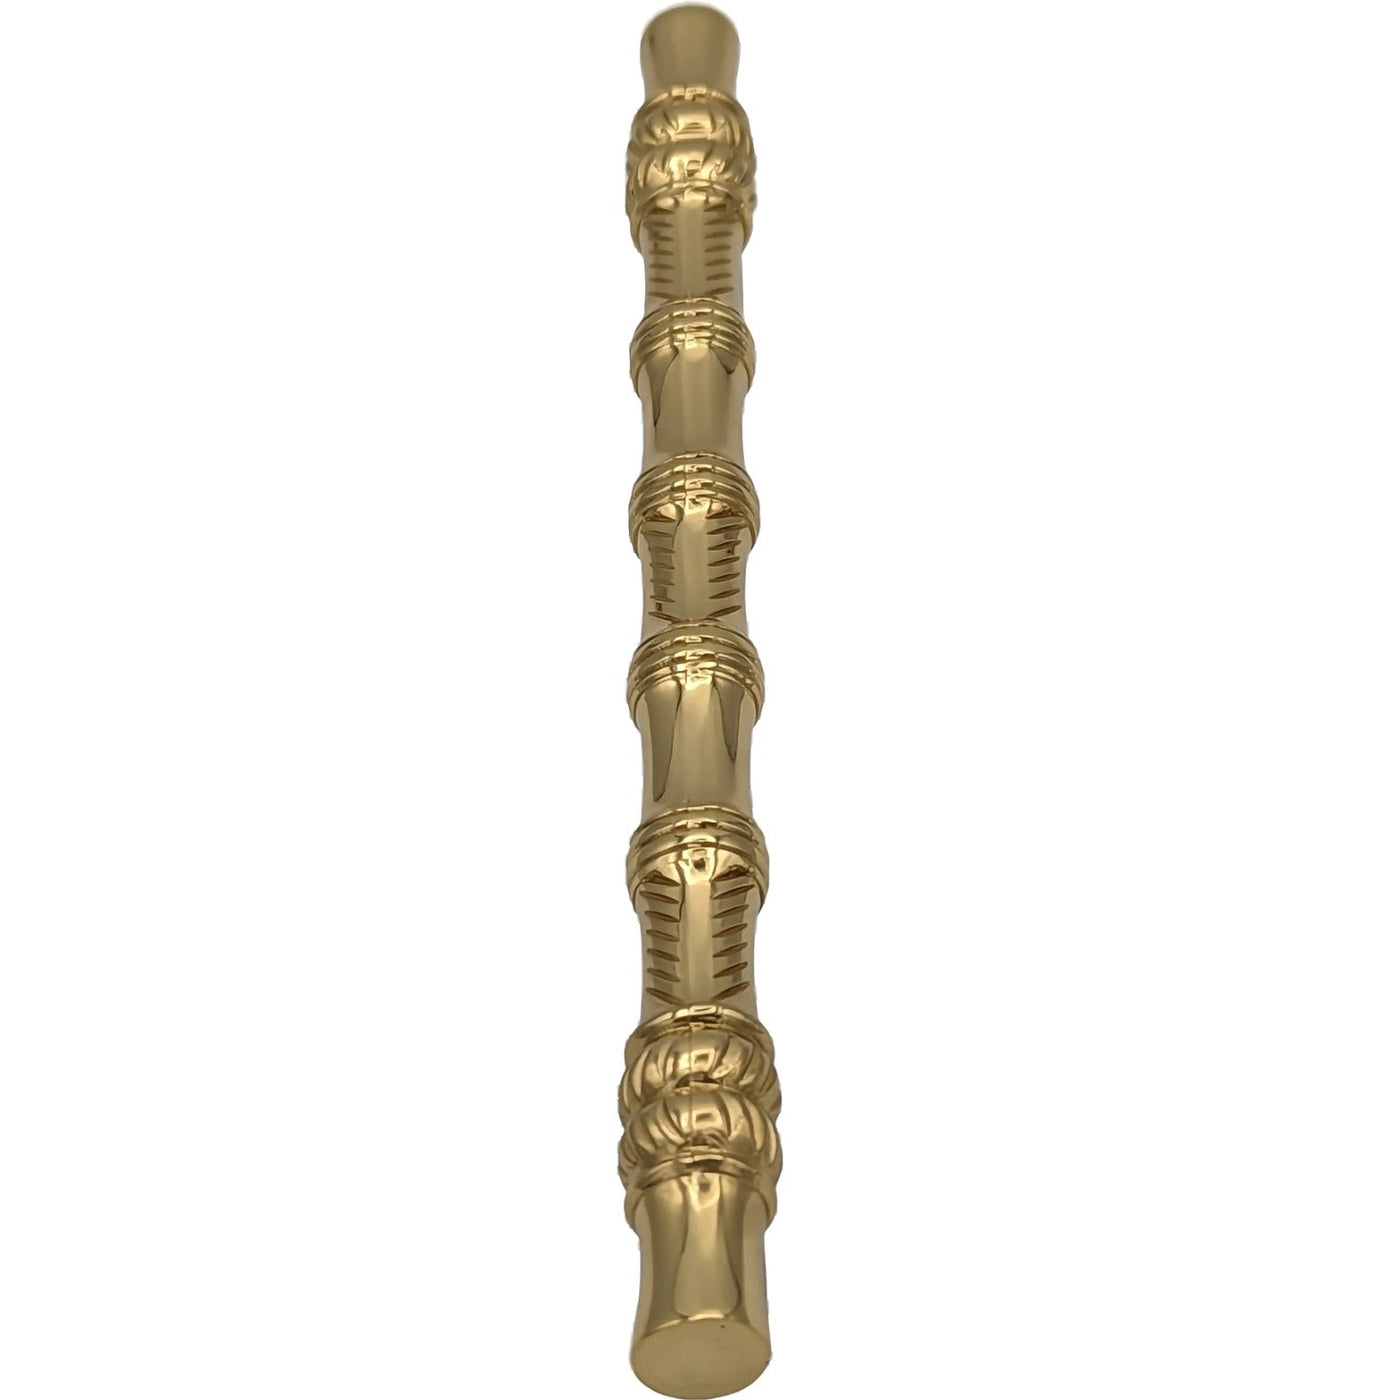 6 Inch Overall (4 1/2 Inch c-c) Japanese Bamboo Pull (Polished Brass Finish)